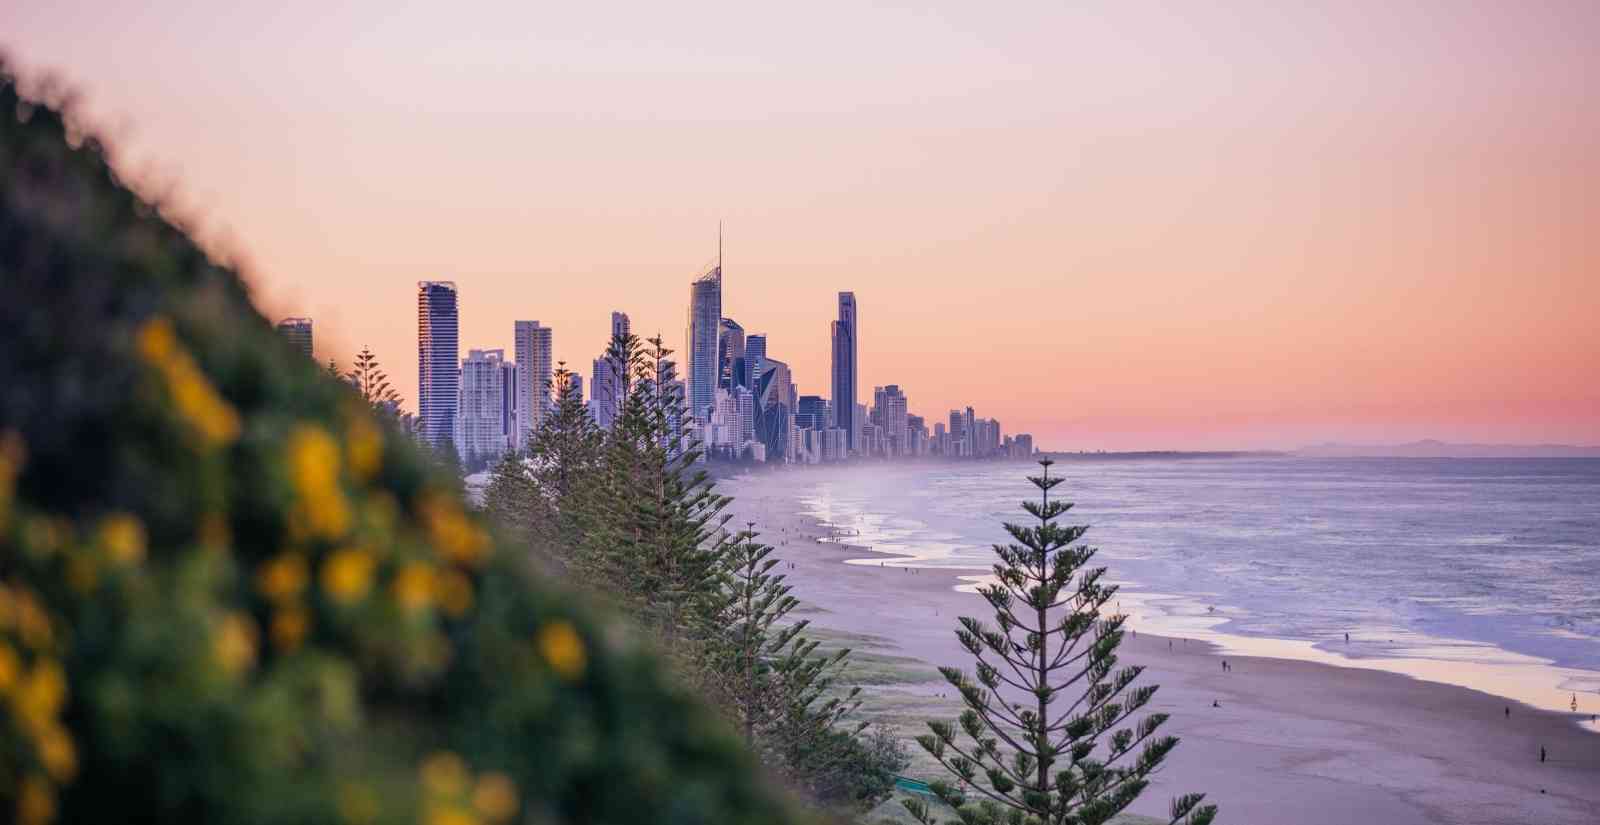 Stay In The Know: Uncover These 6 Gold Coast Local Gems